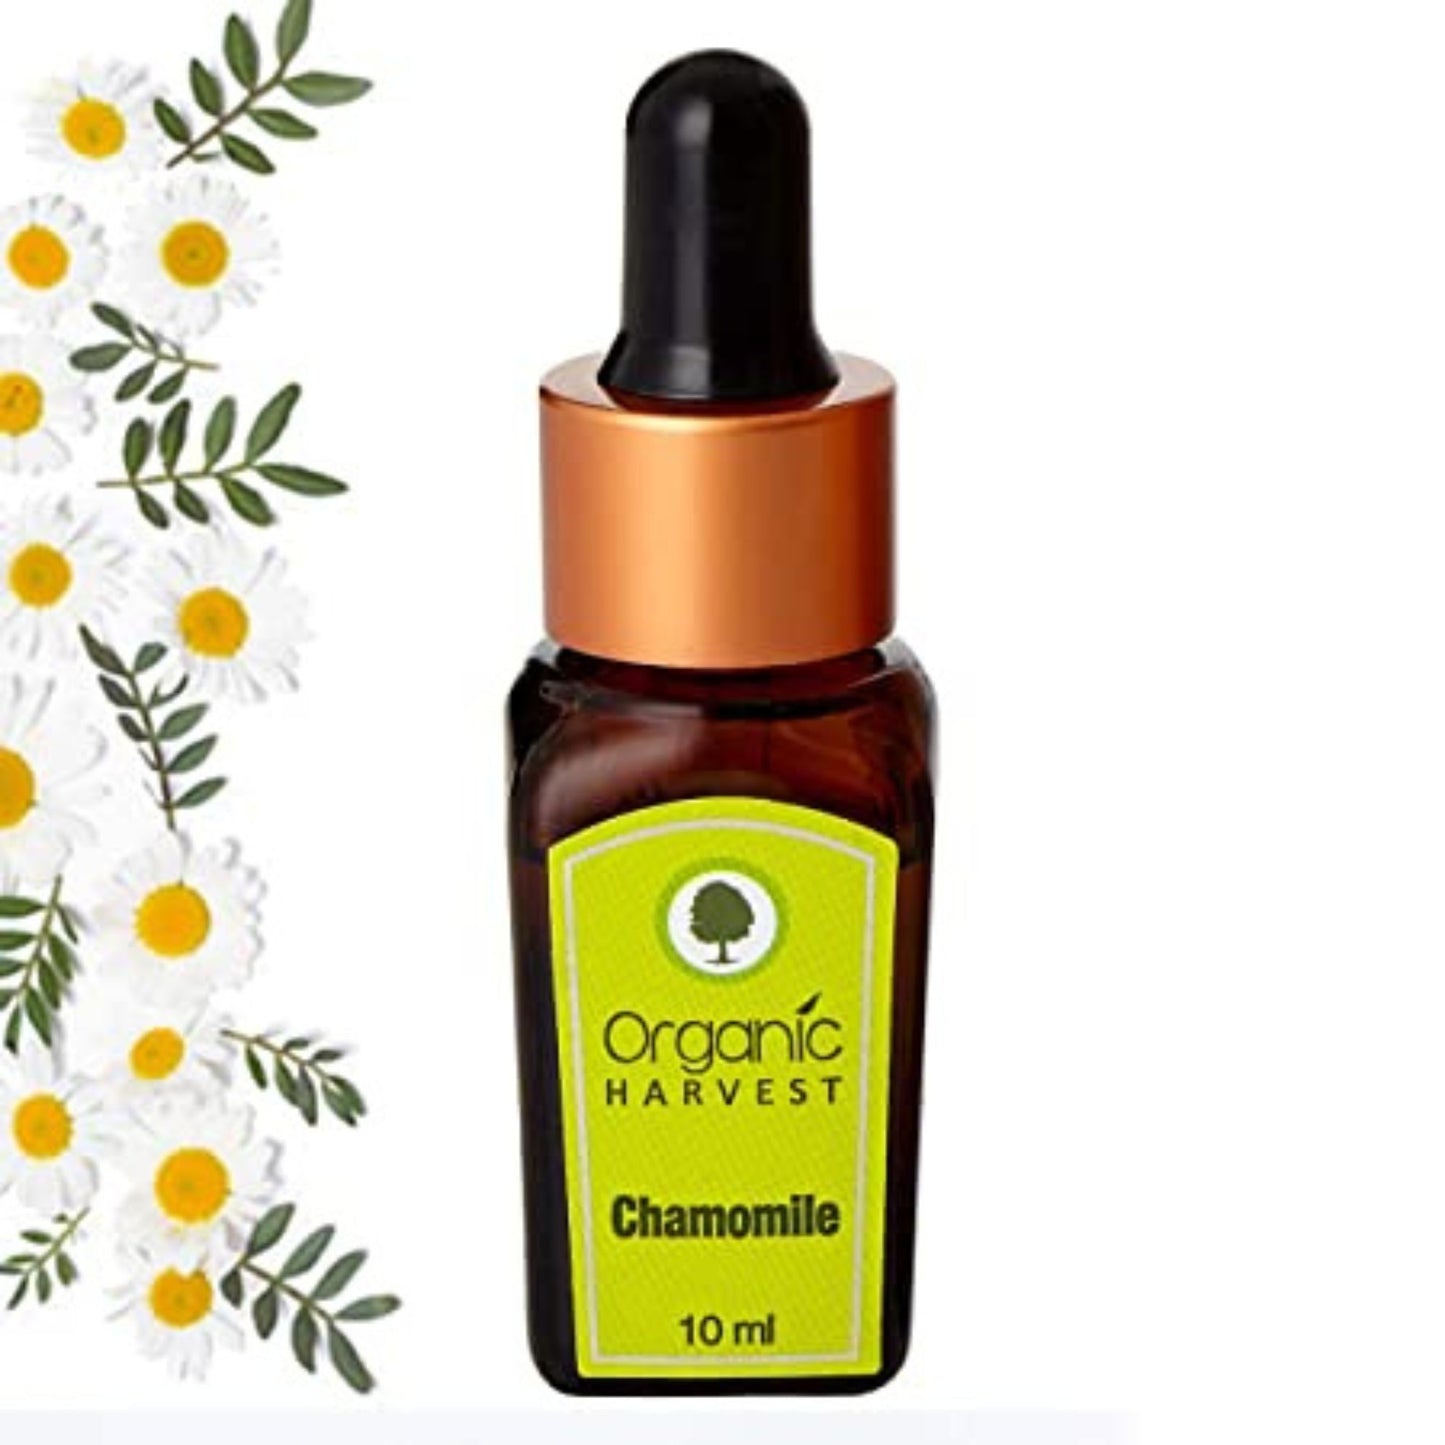 Organic Harvest Lavender Essential Oil, Cures Dry Acne, Hair Growth, Face, Hair Care, Pure & Undiluted Therapeutic Grade Oil, Excellent for Aromatherapy